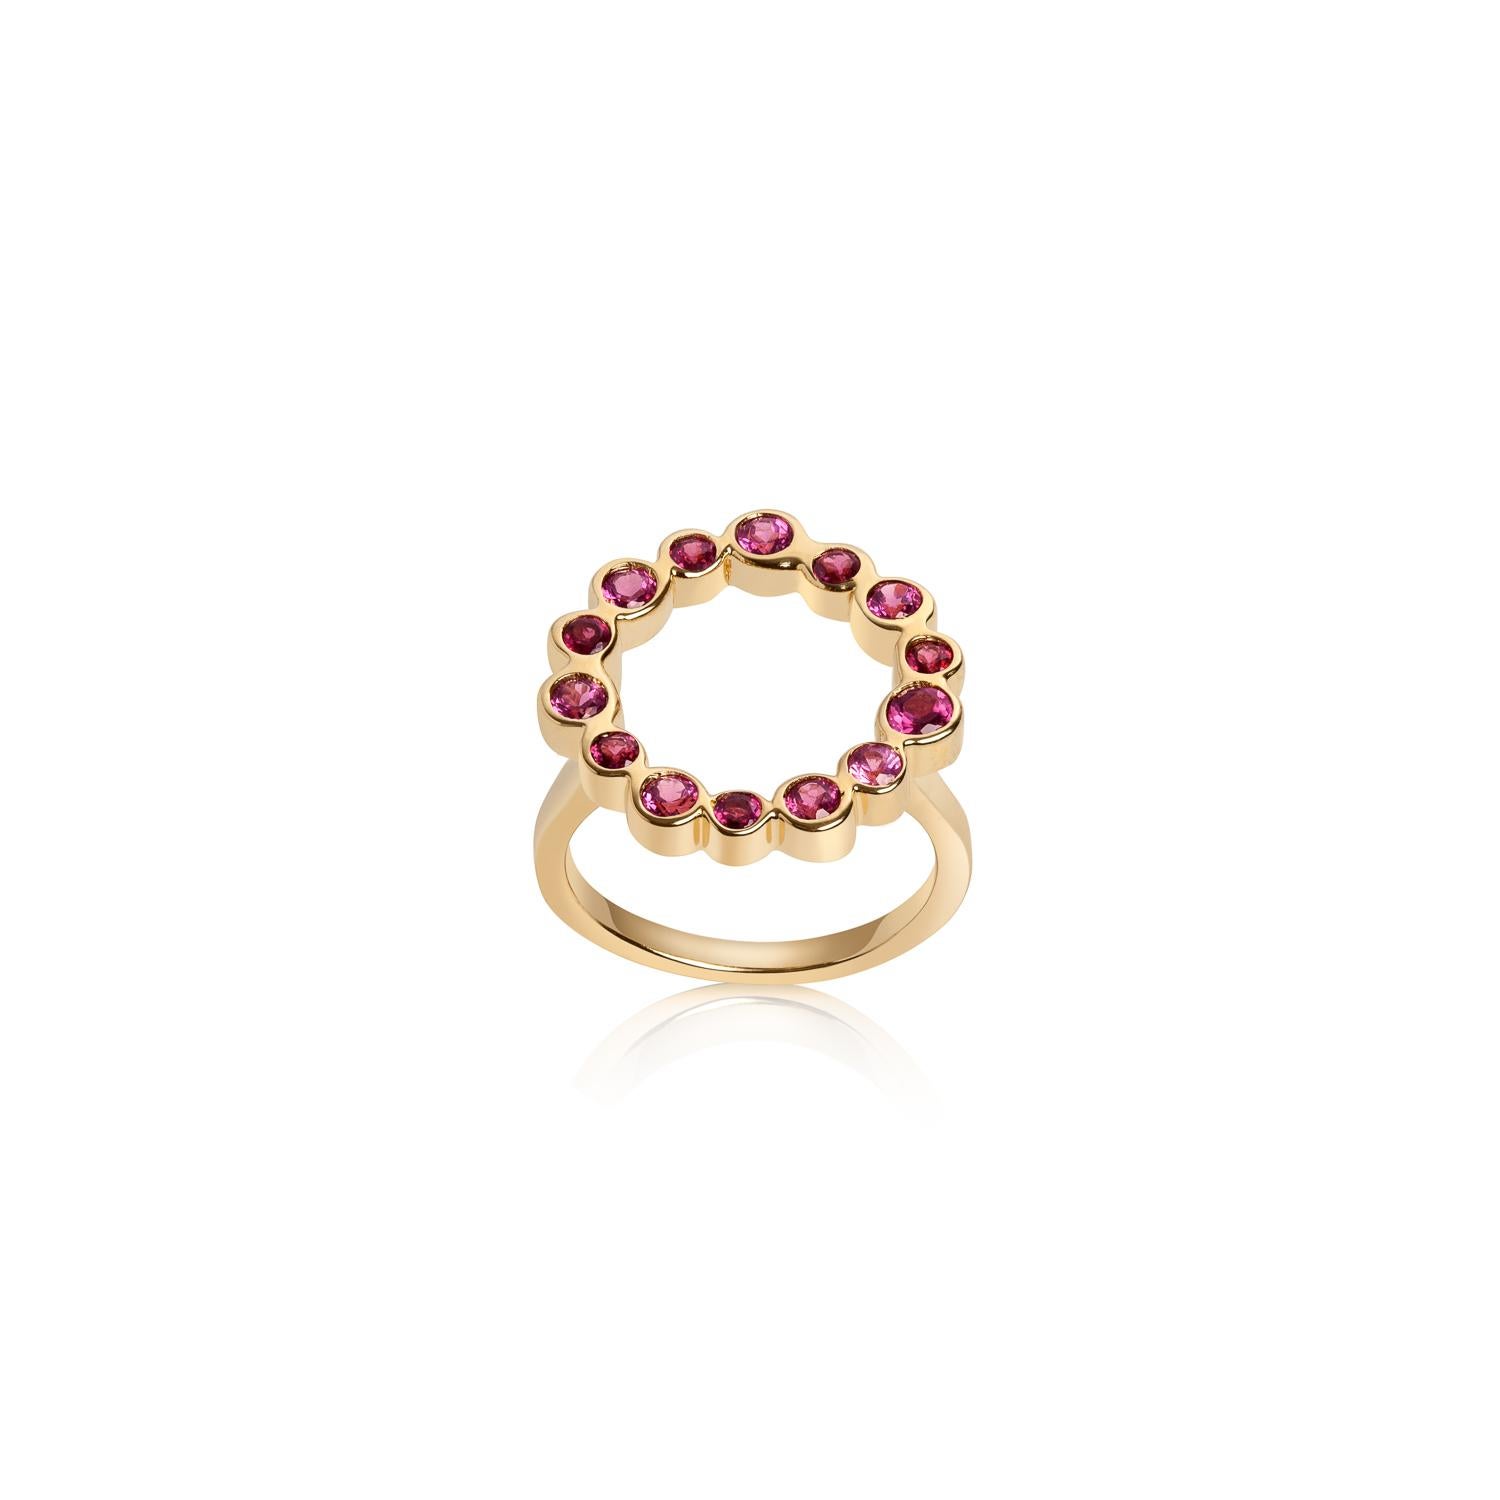 Wear this open circle ring composed of Hi June Parker's signature organic circles filled with
gemstones to express the universal original perfection that makes you unique.

Inspired by seeing the cross-section view of life, as if slicing a tree to